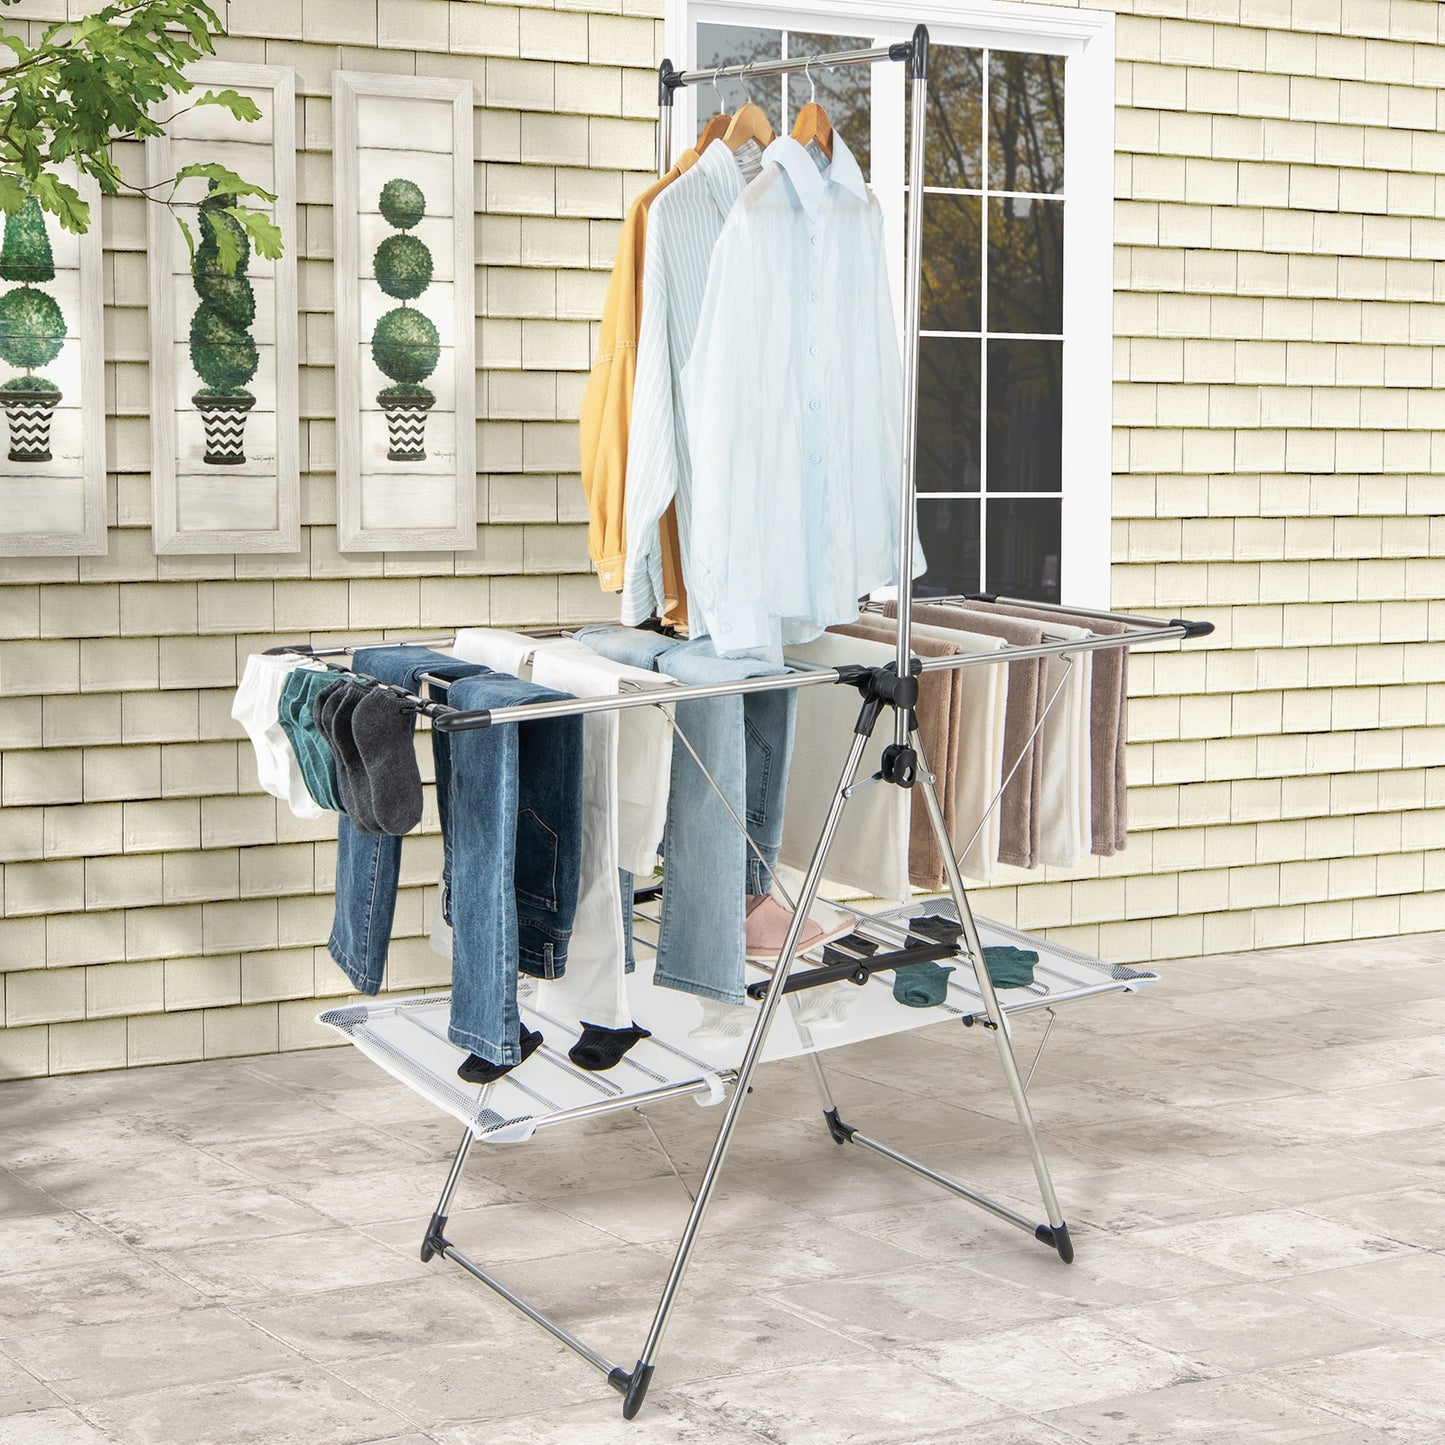 Large Foldable Clothes Drying Rack with Tall Hanging Bar